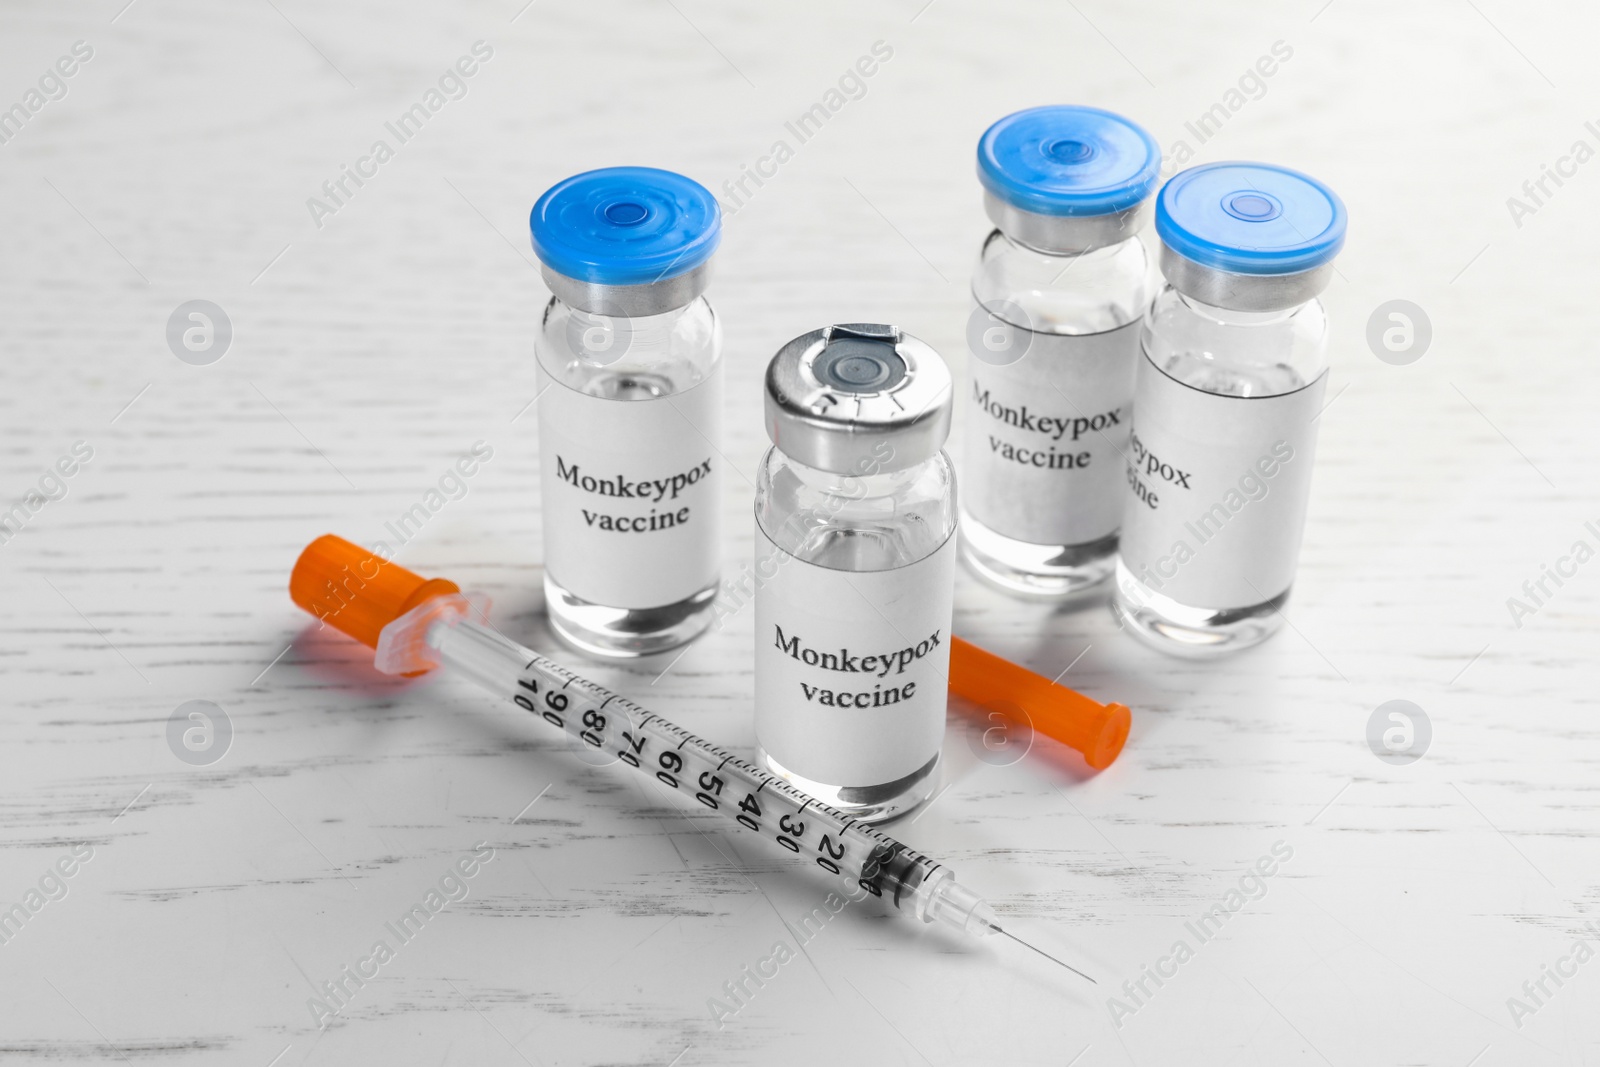 Photo of Monkeypox vaccine in glass vials and syringe on white wooden table